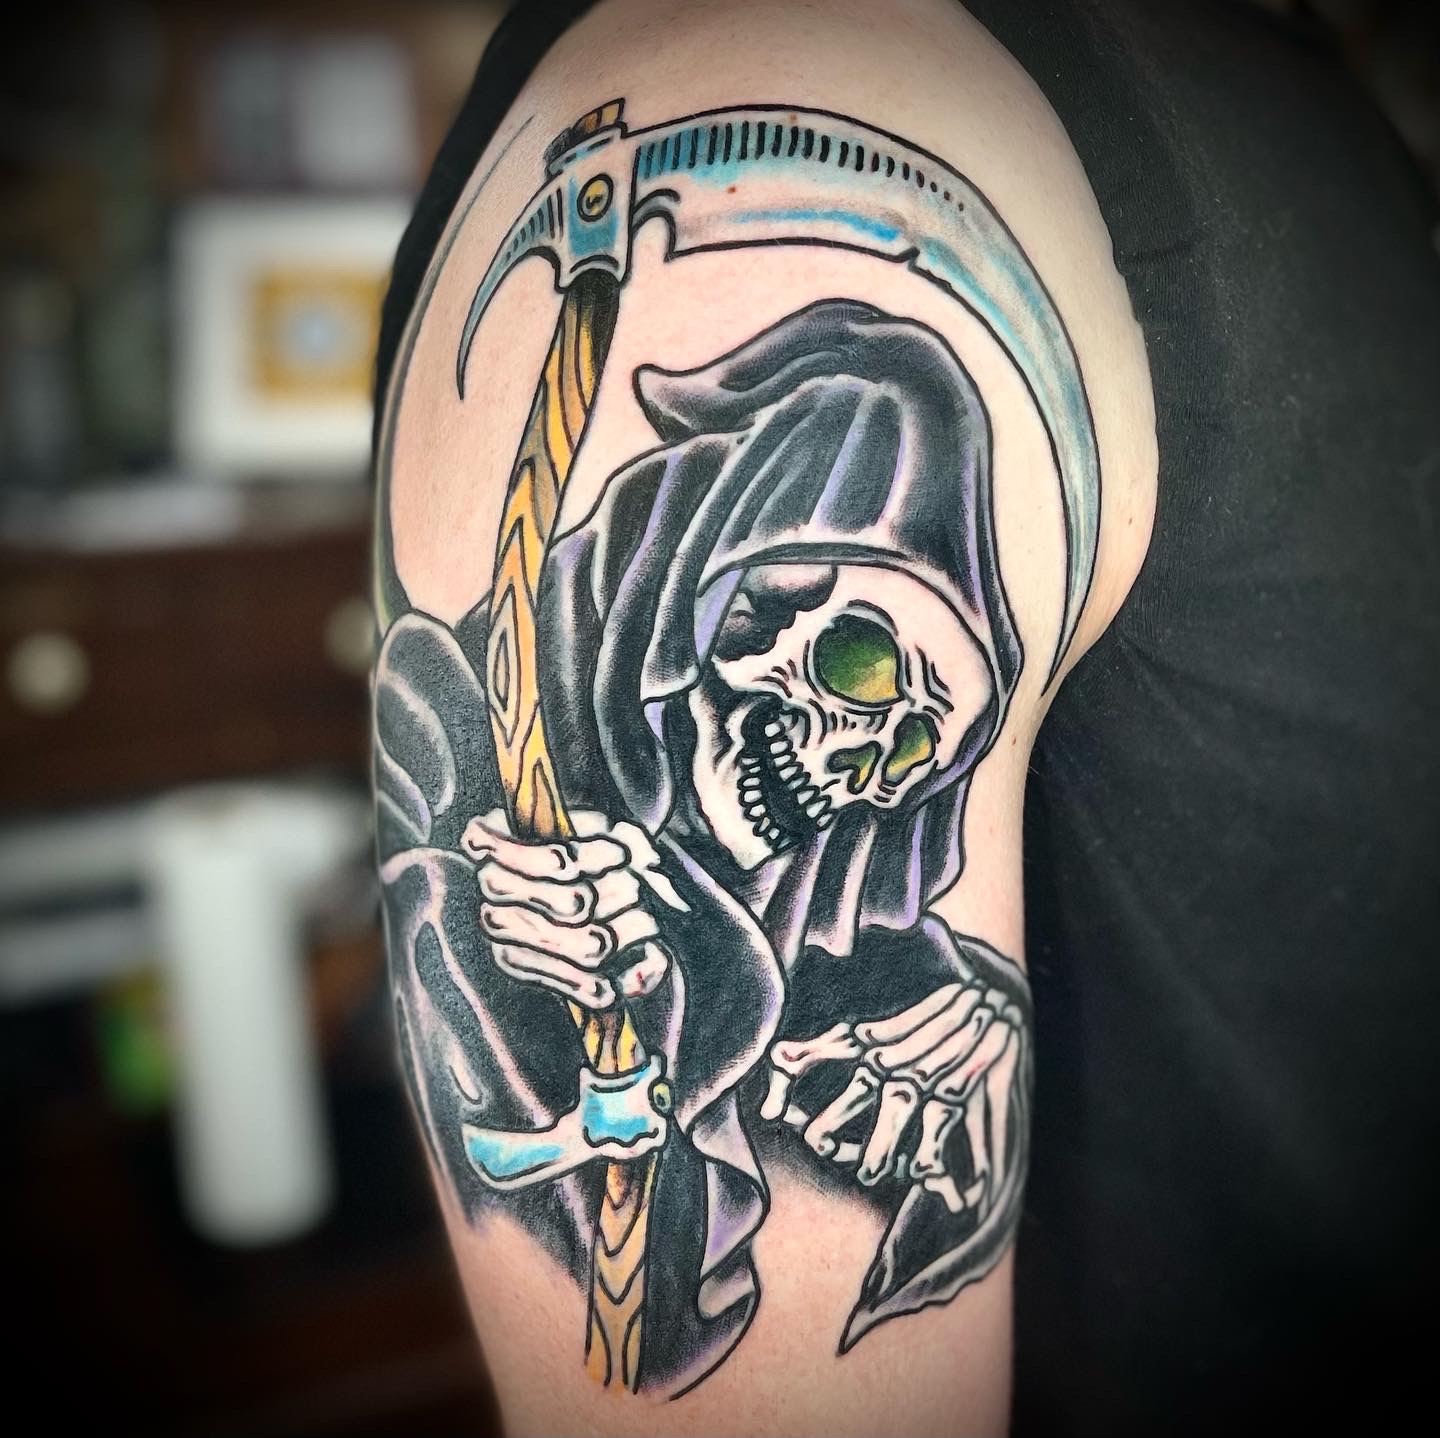 Tattoo of the grim reaper on a mans arm from Dallas tattoo artist